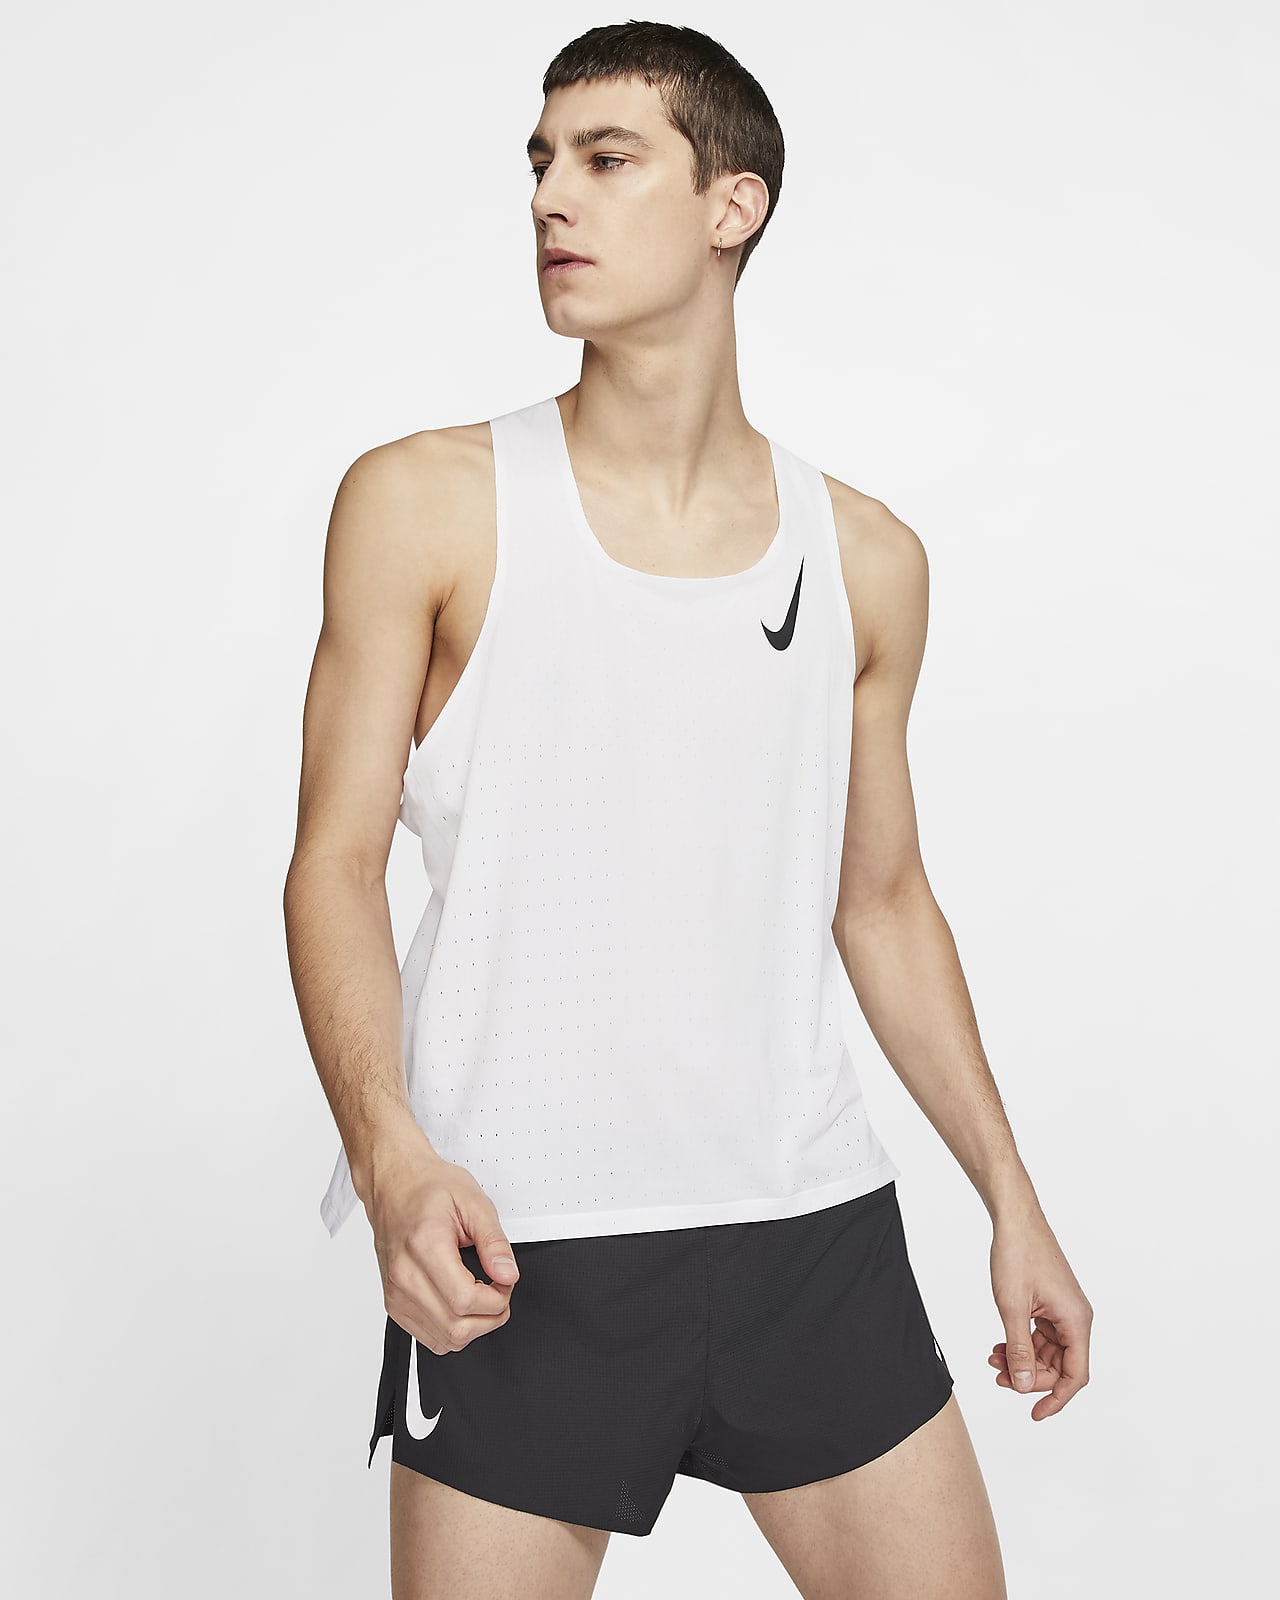 nike vest and shorts